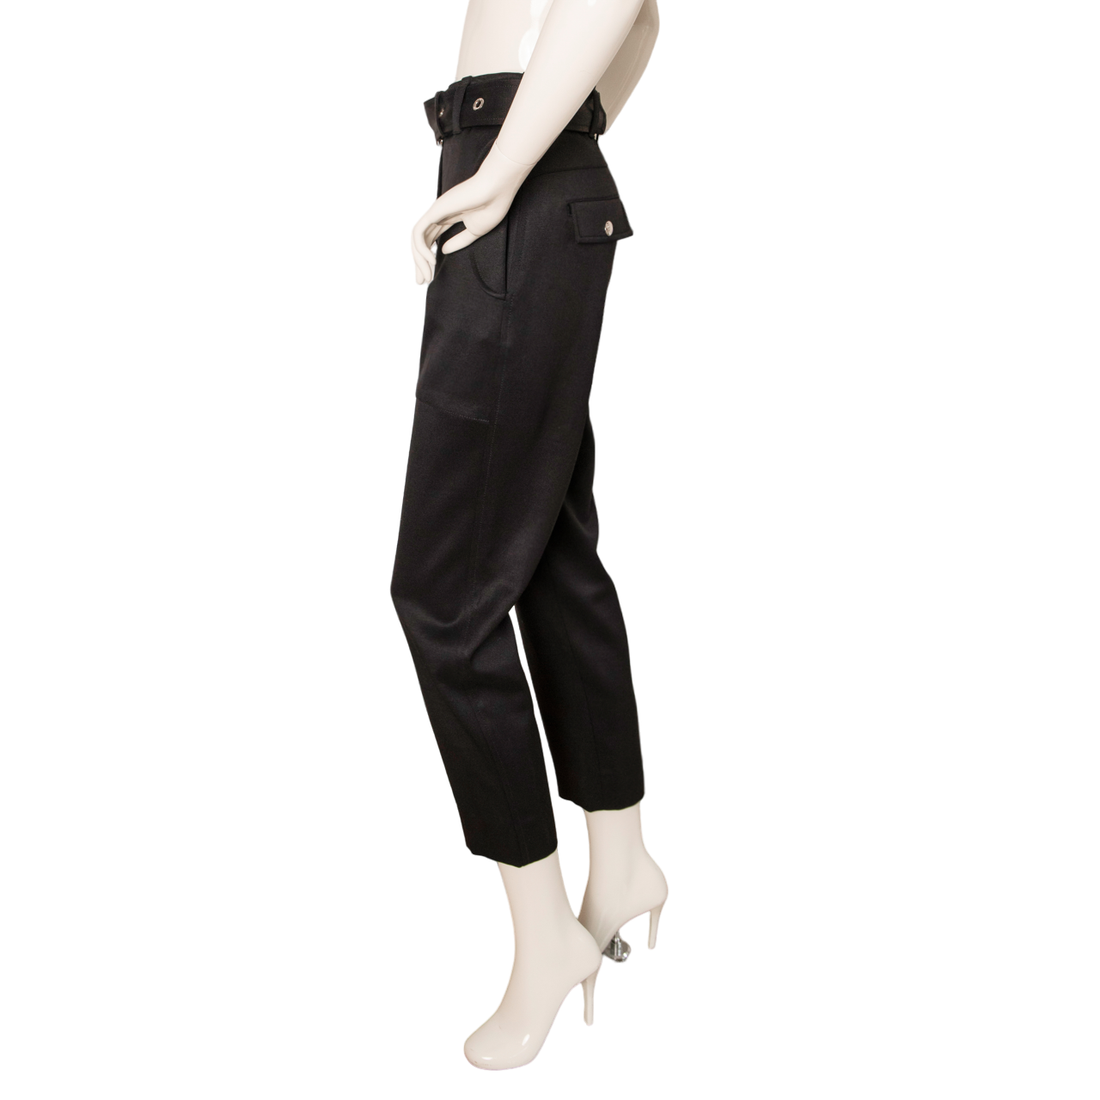 Louis Vuitton high-waisted trousers with side pockets and belt